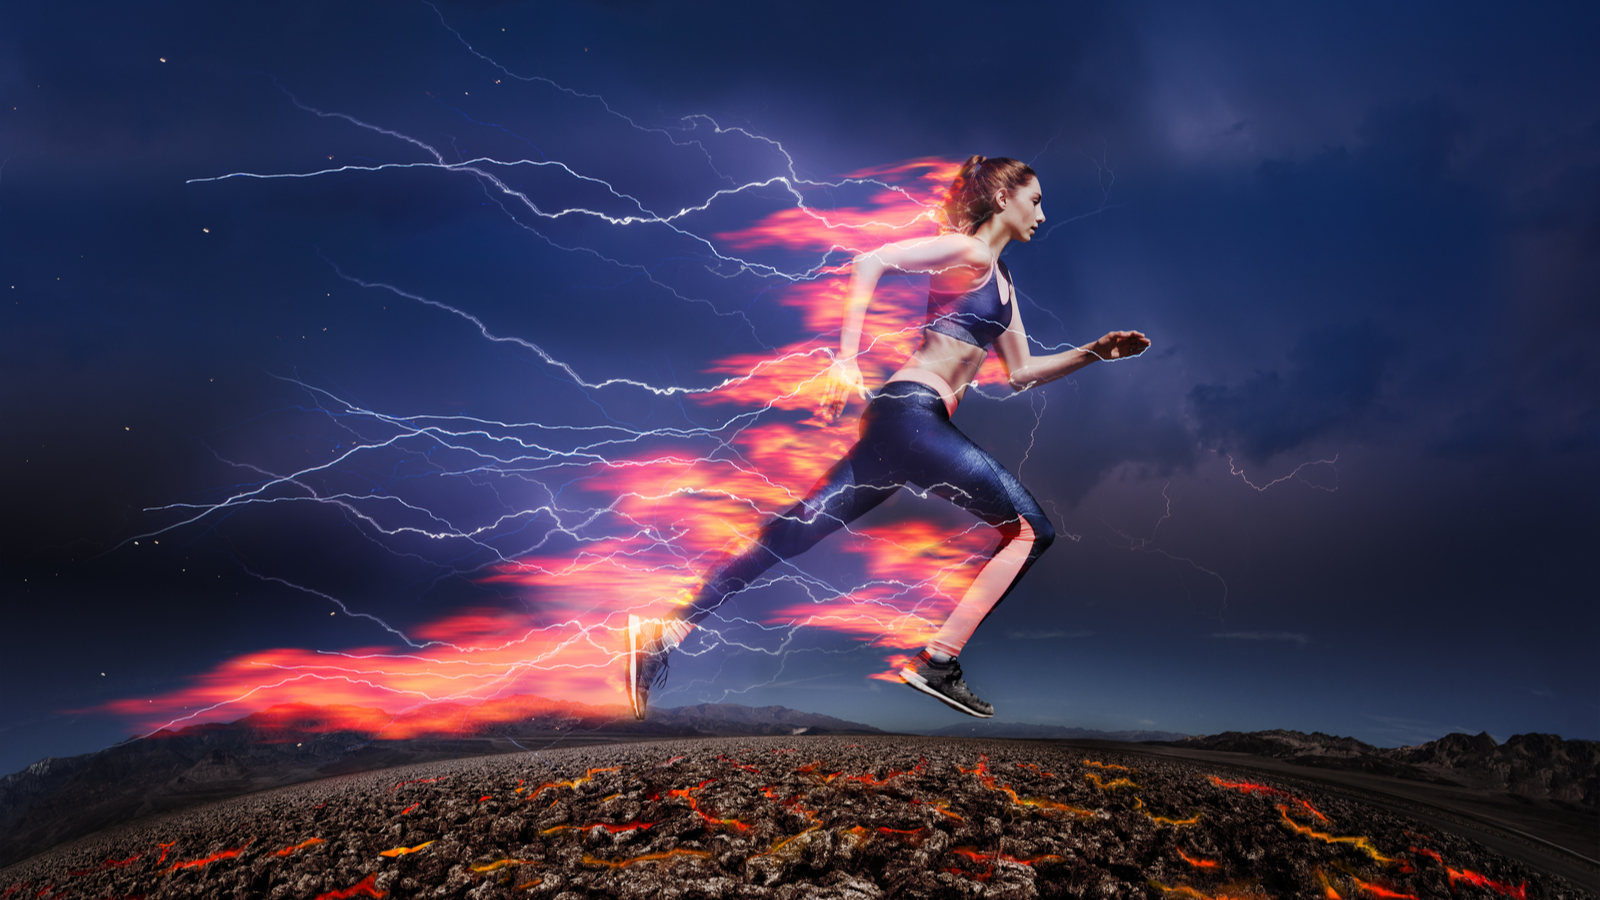 Woman running fast against stormy sky with flash